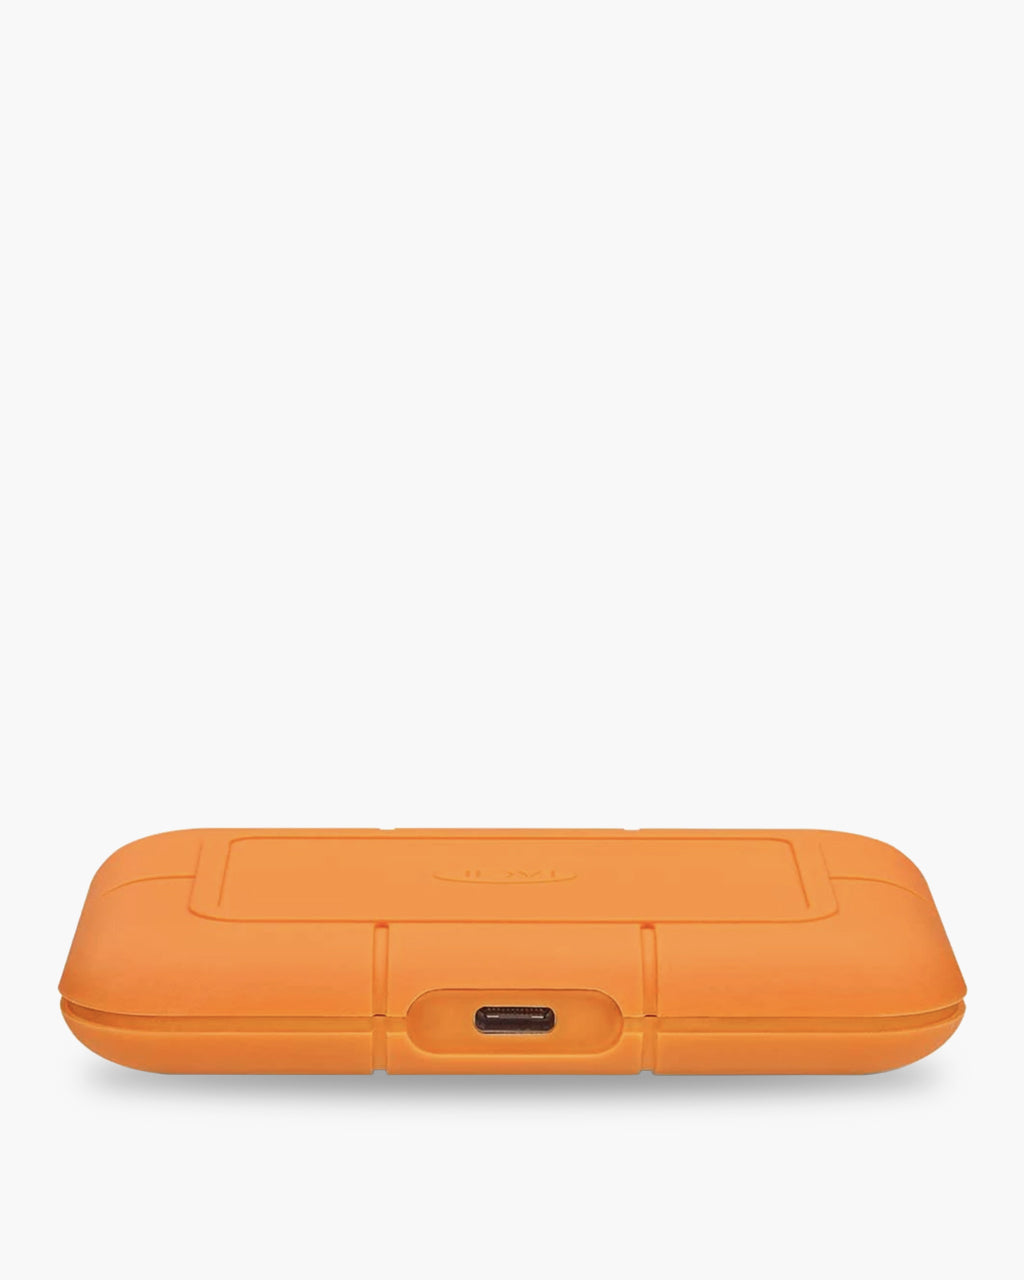 Your Workflow with LaCie Rugged SSD 1TB: Security – BrandsWalk